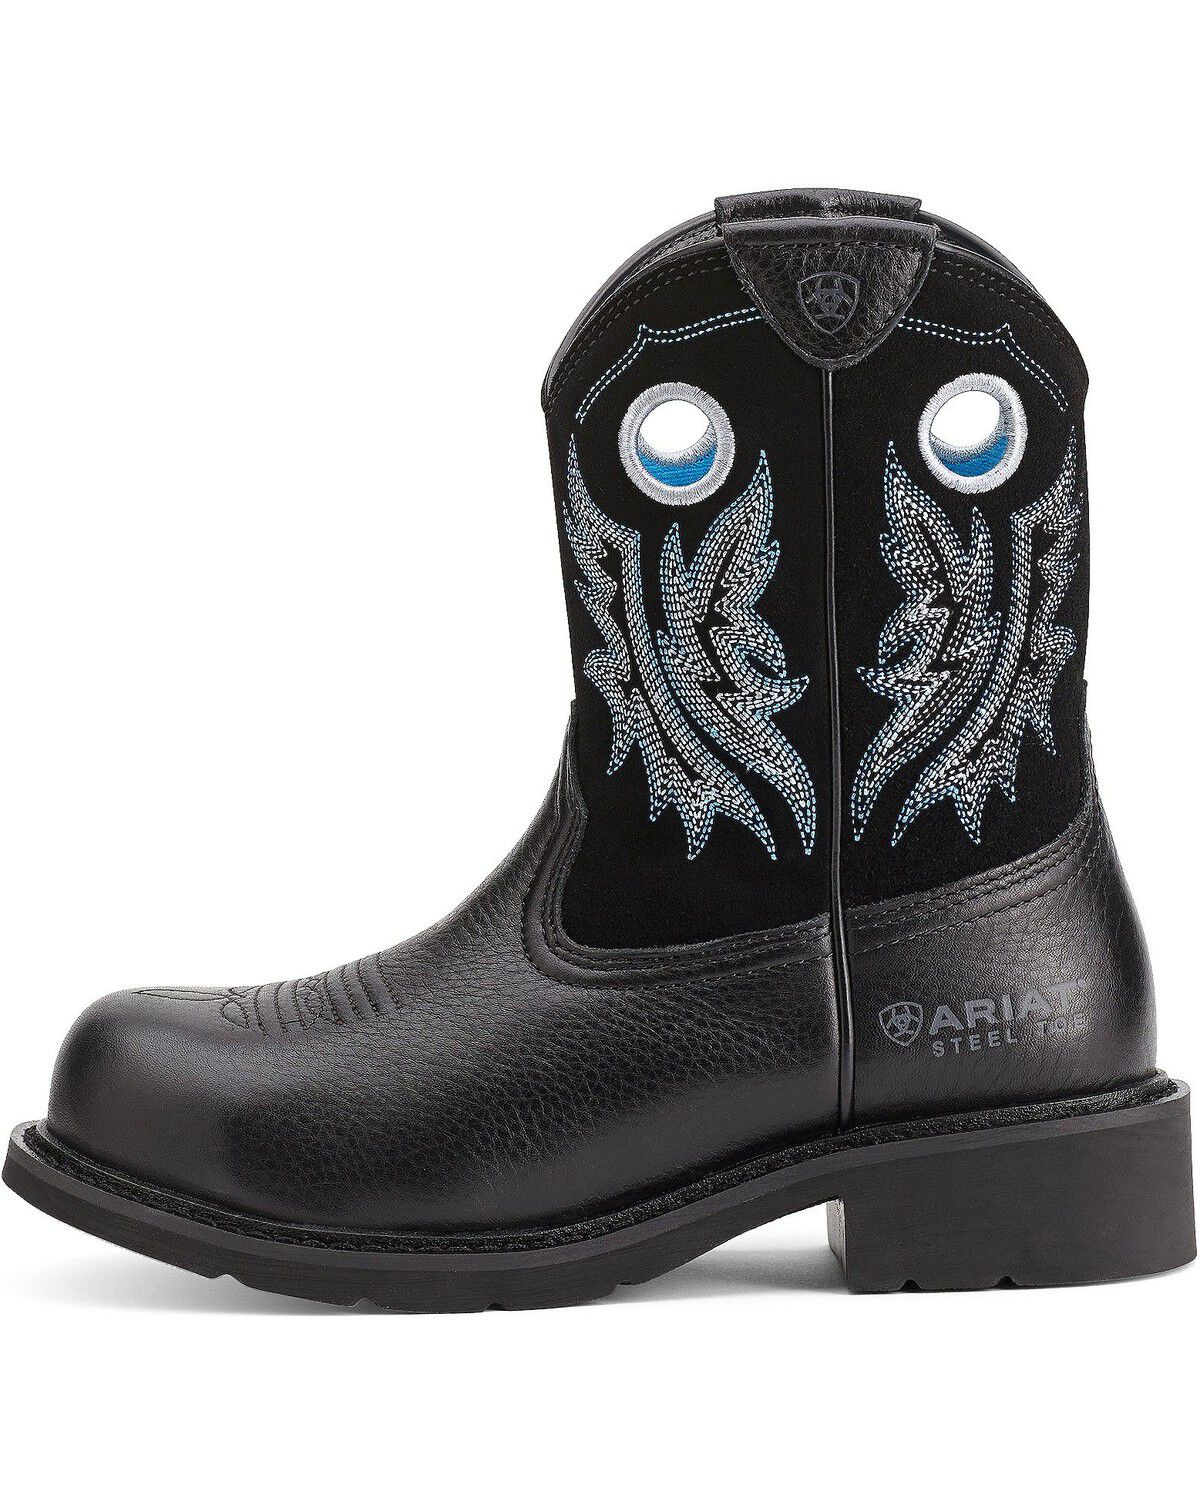 ariat fatbaby steel toe boots